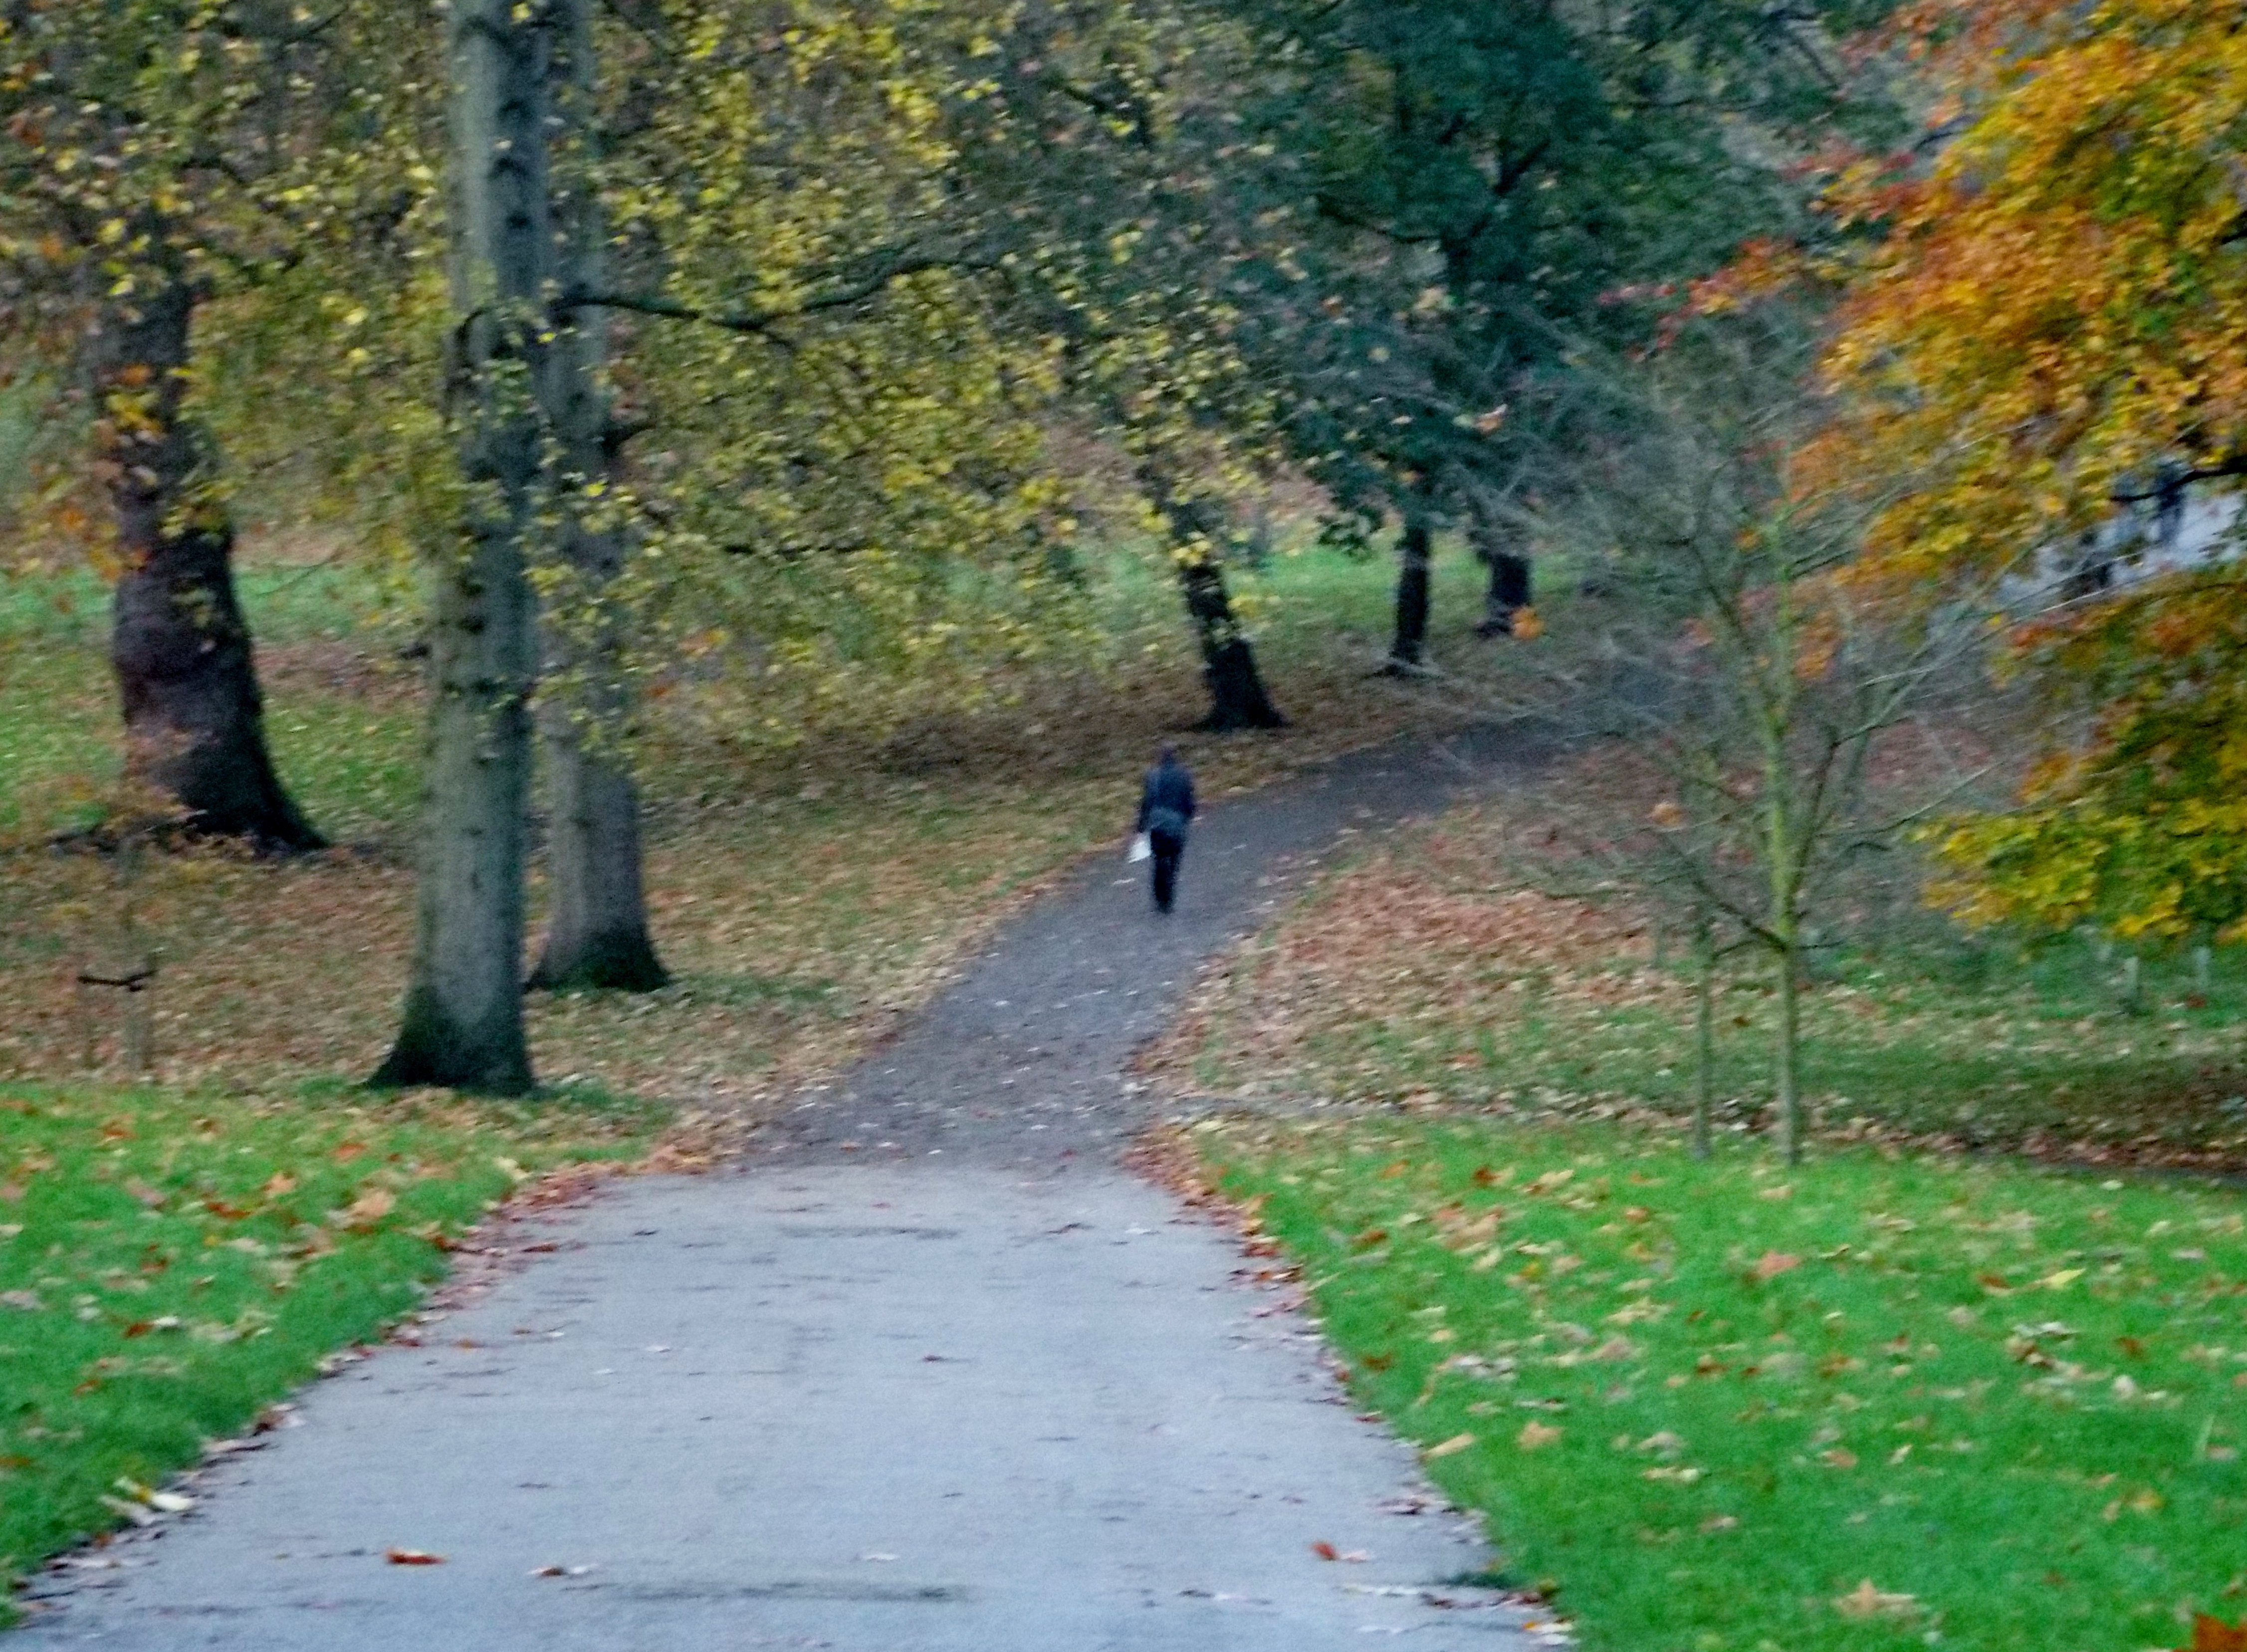 While not your traditional landscape, this shot of a lone walker in Green Park, in Central London near Buckingham Palace is, you have to admit, a peaceful shot.